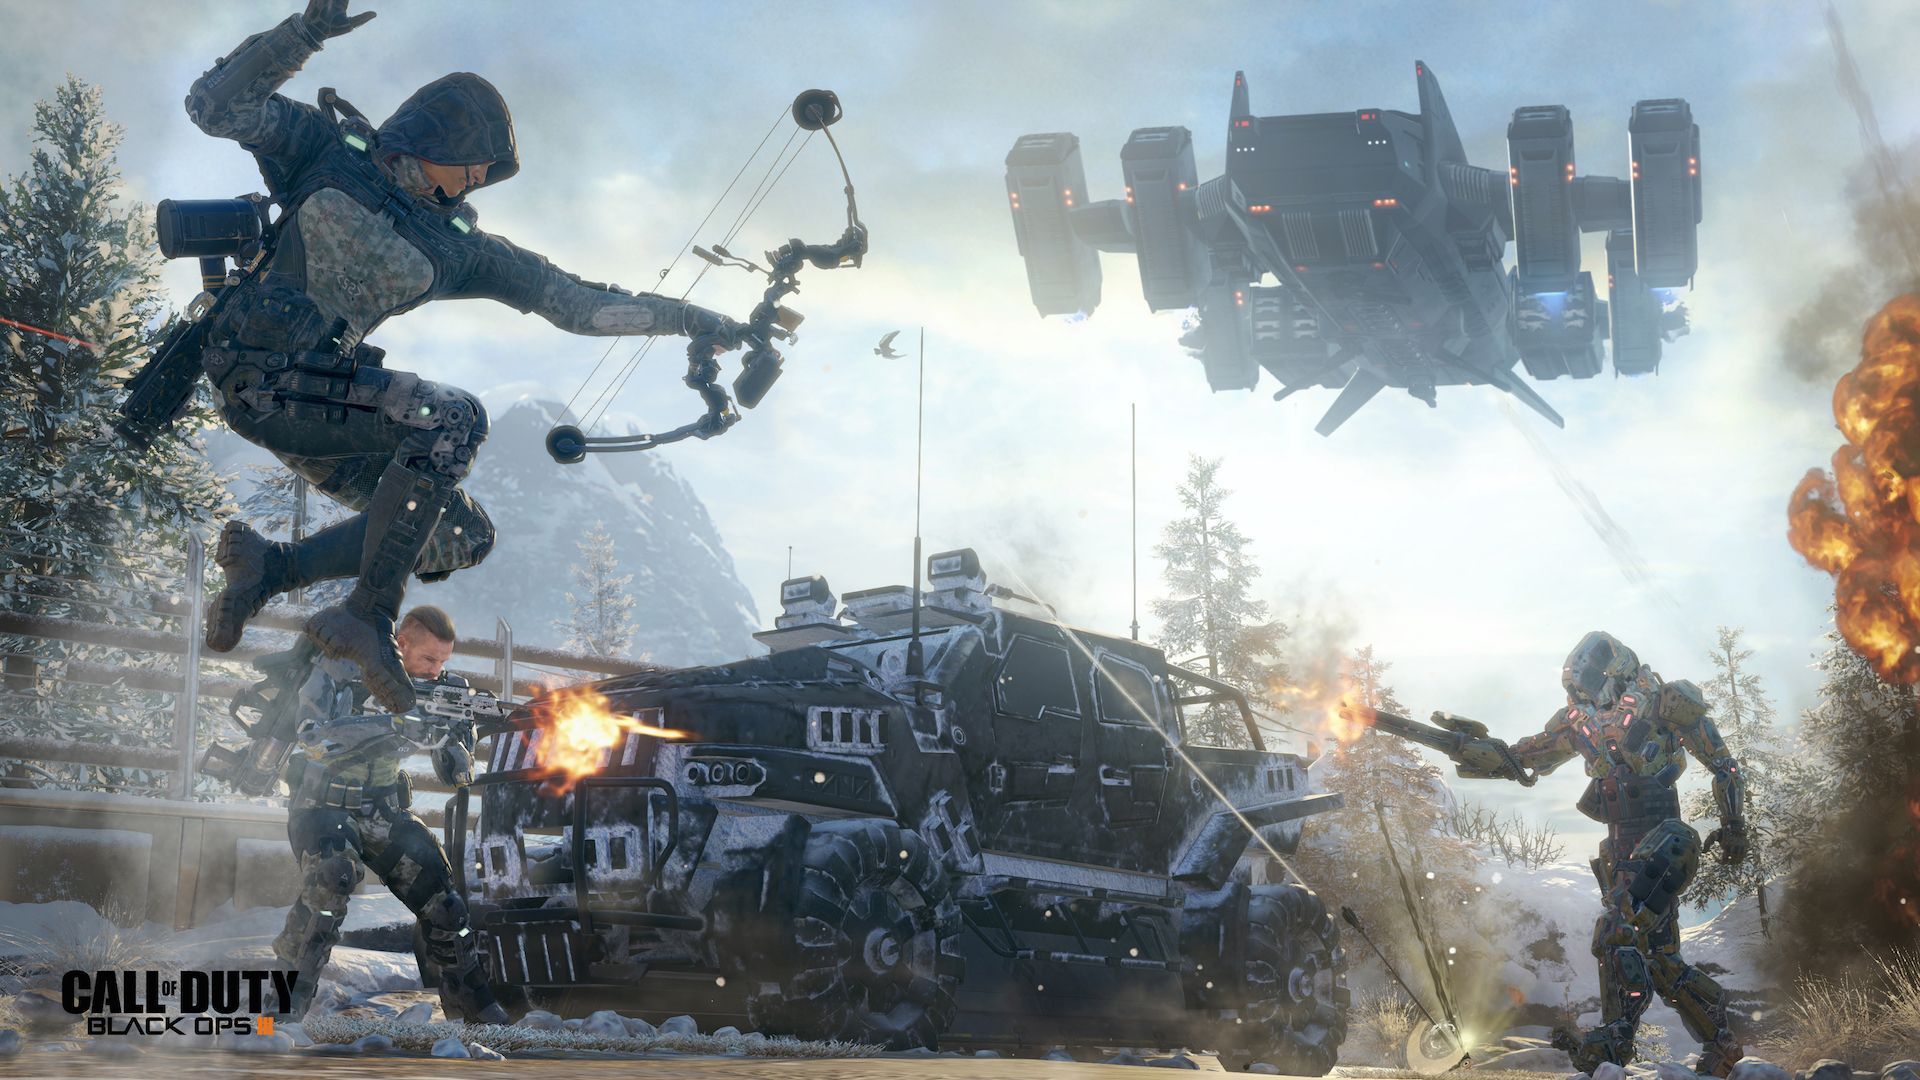 Black Ops 3 guide: 7 tips for mastering Call of Duty's multiplayer